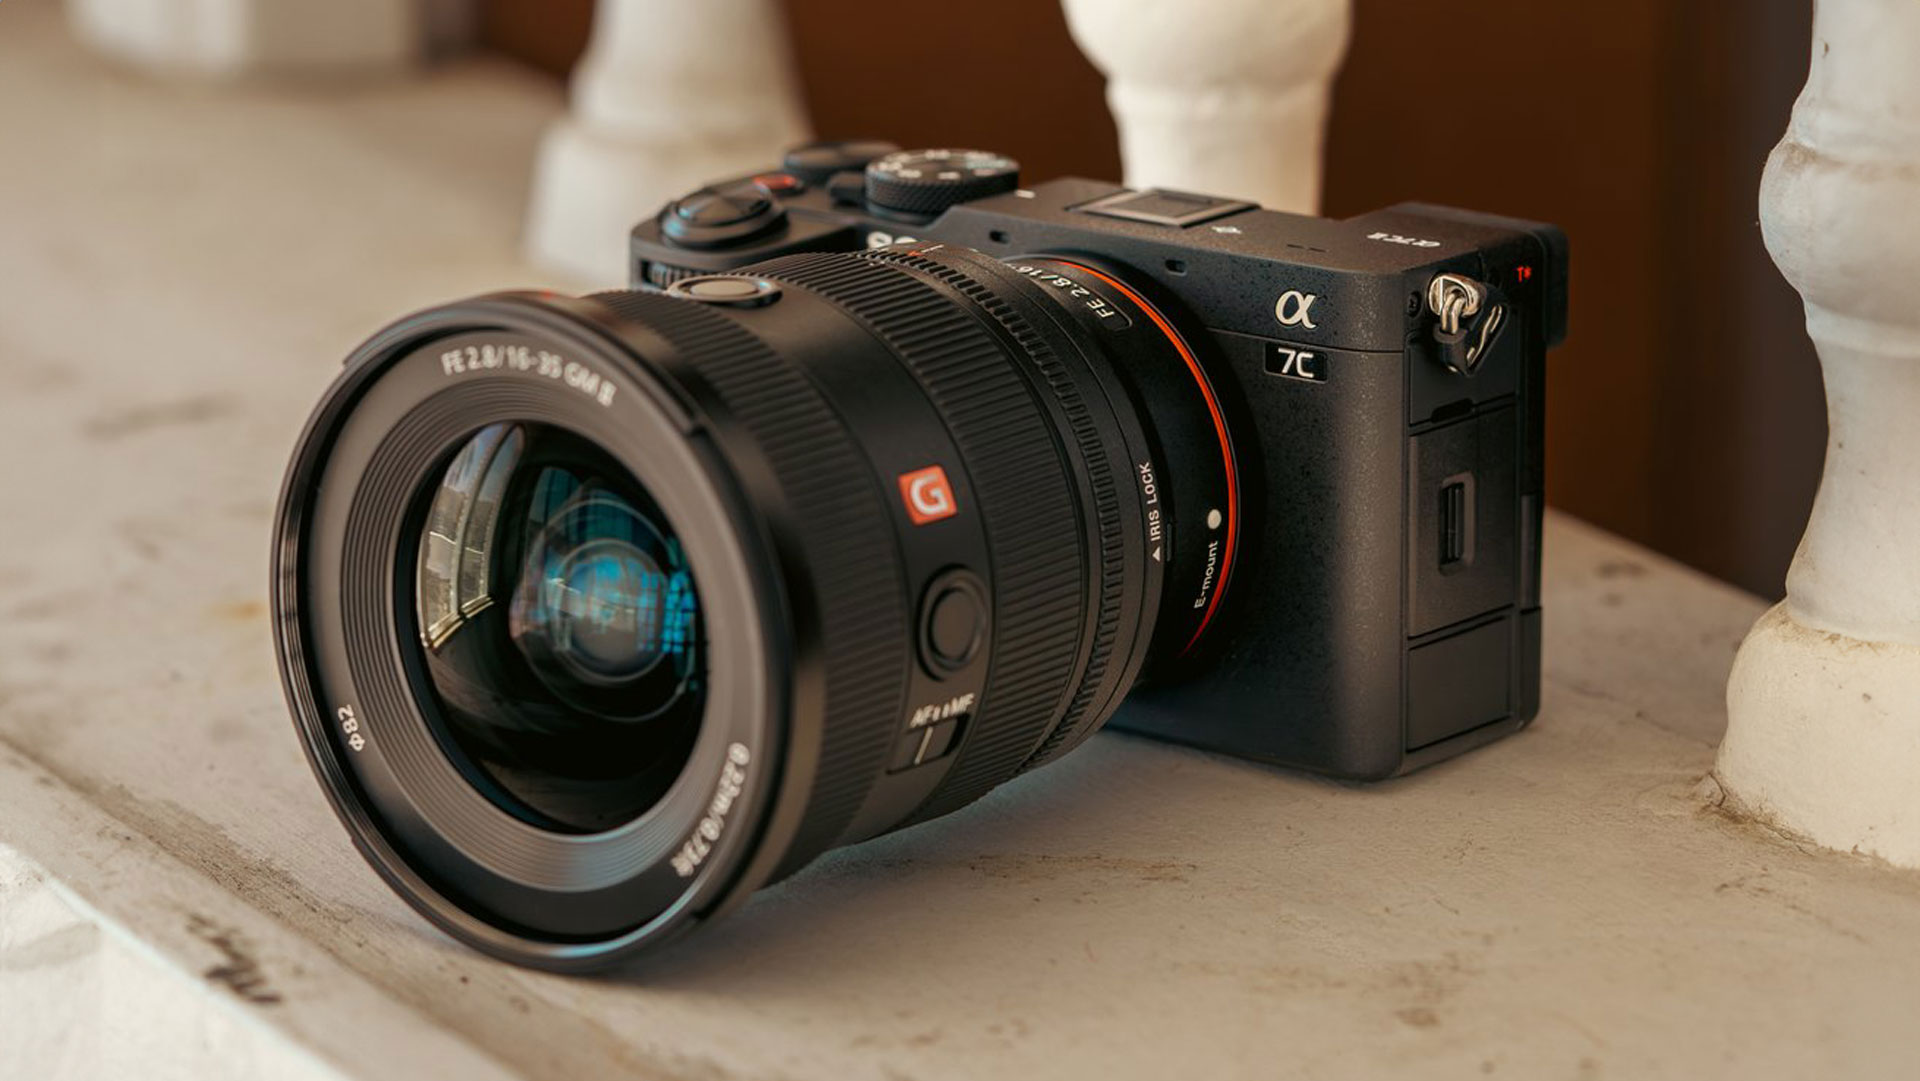 Sony a7C II Announced – New Compact Full Frame Camera with 33MP, 10-Bit  4K60 Super35 Video and More